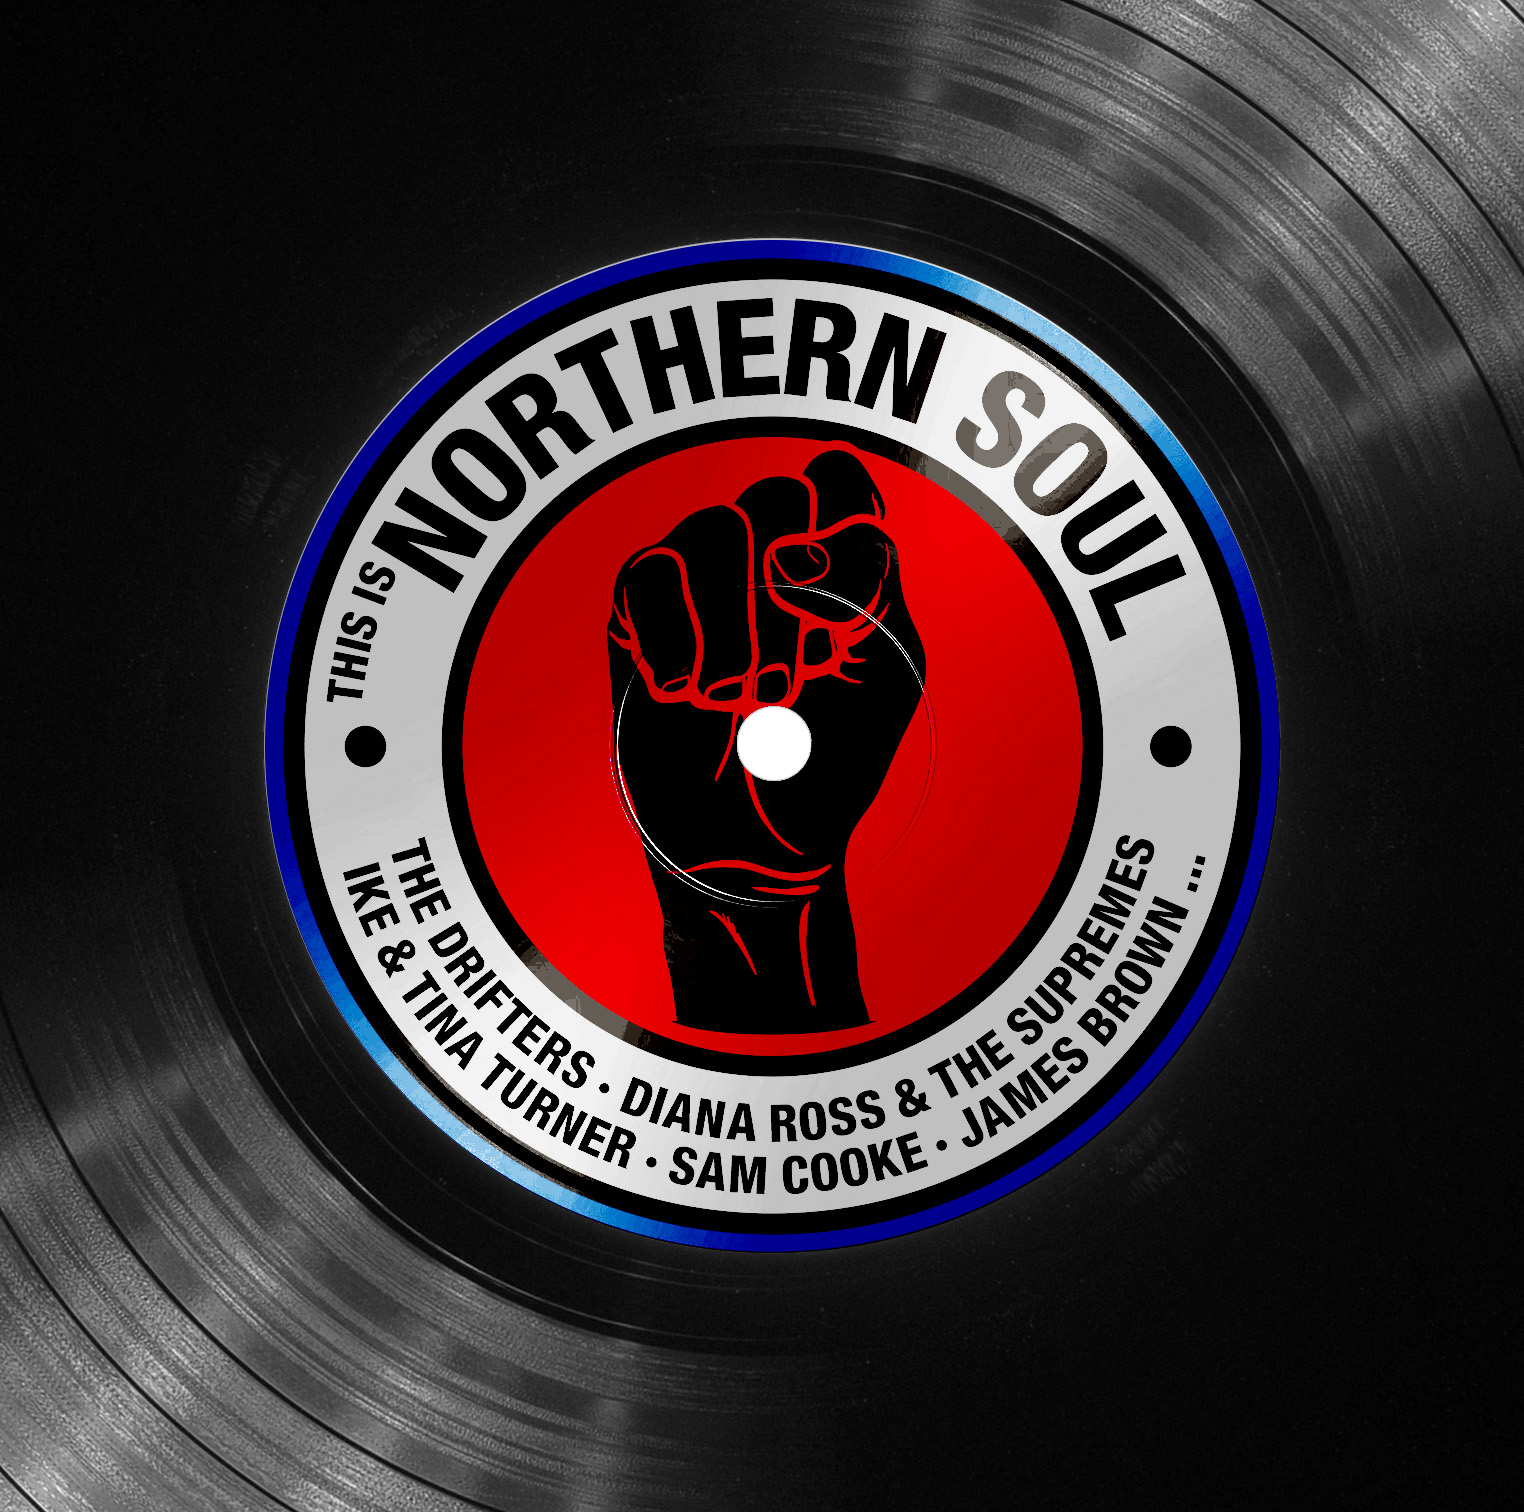 Northern soul cds for sale